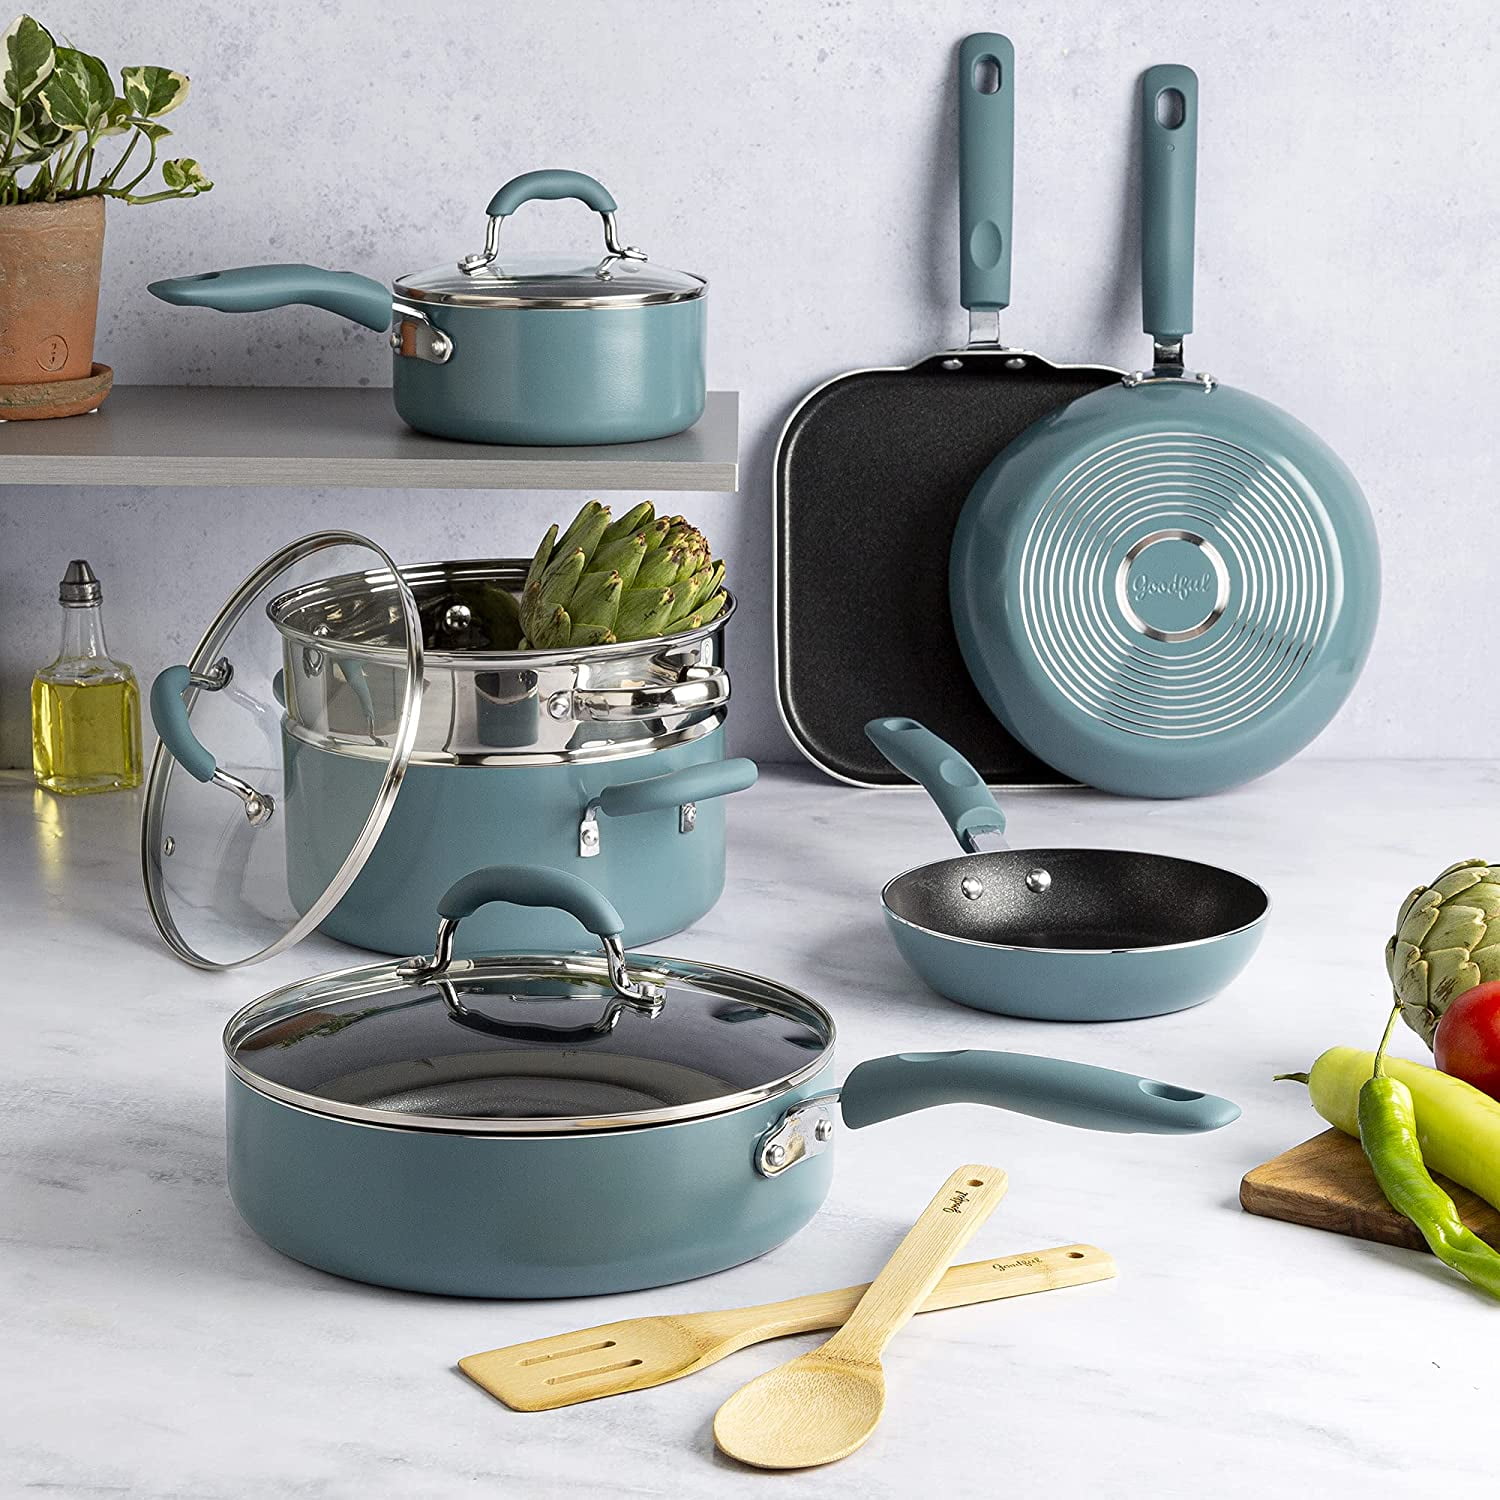 Goodful Is Having A Sale On Nonstick Cookware